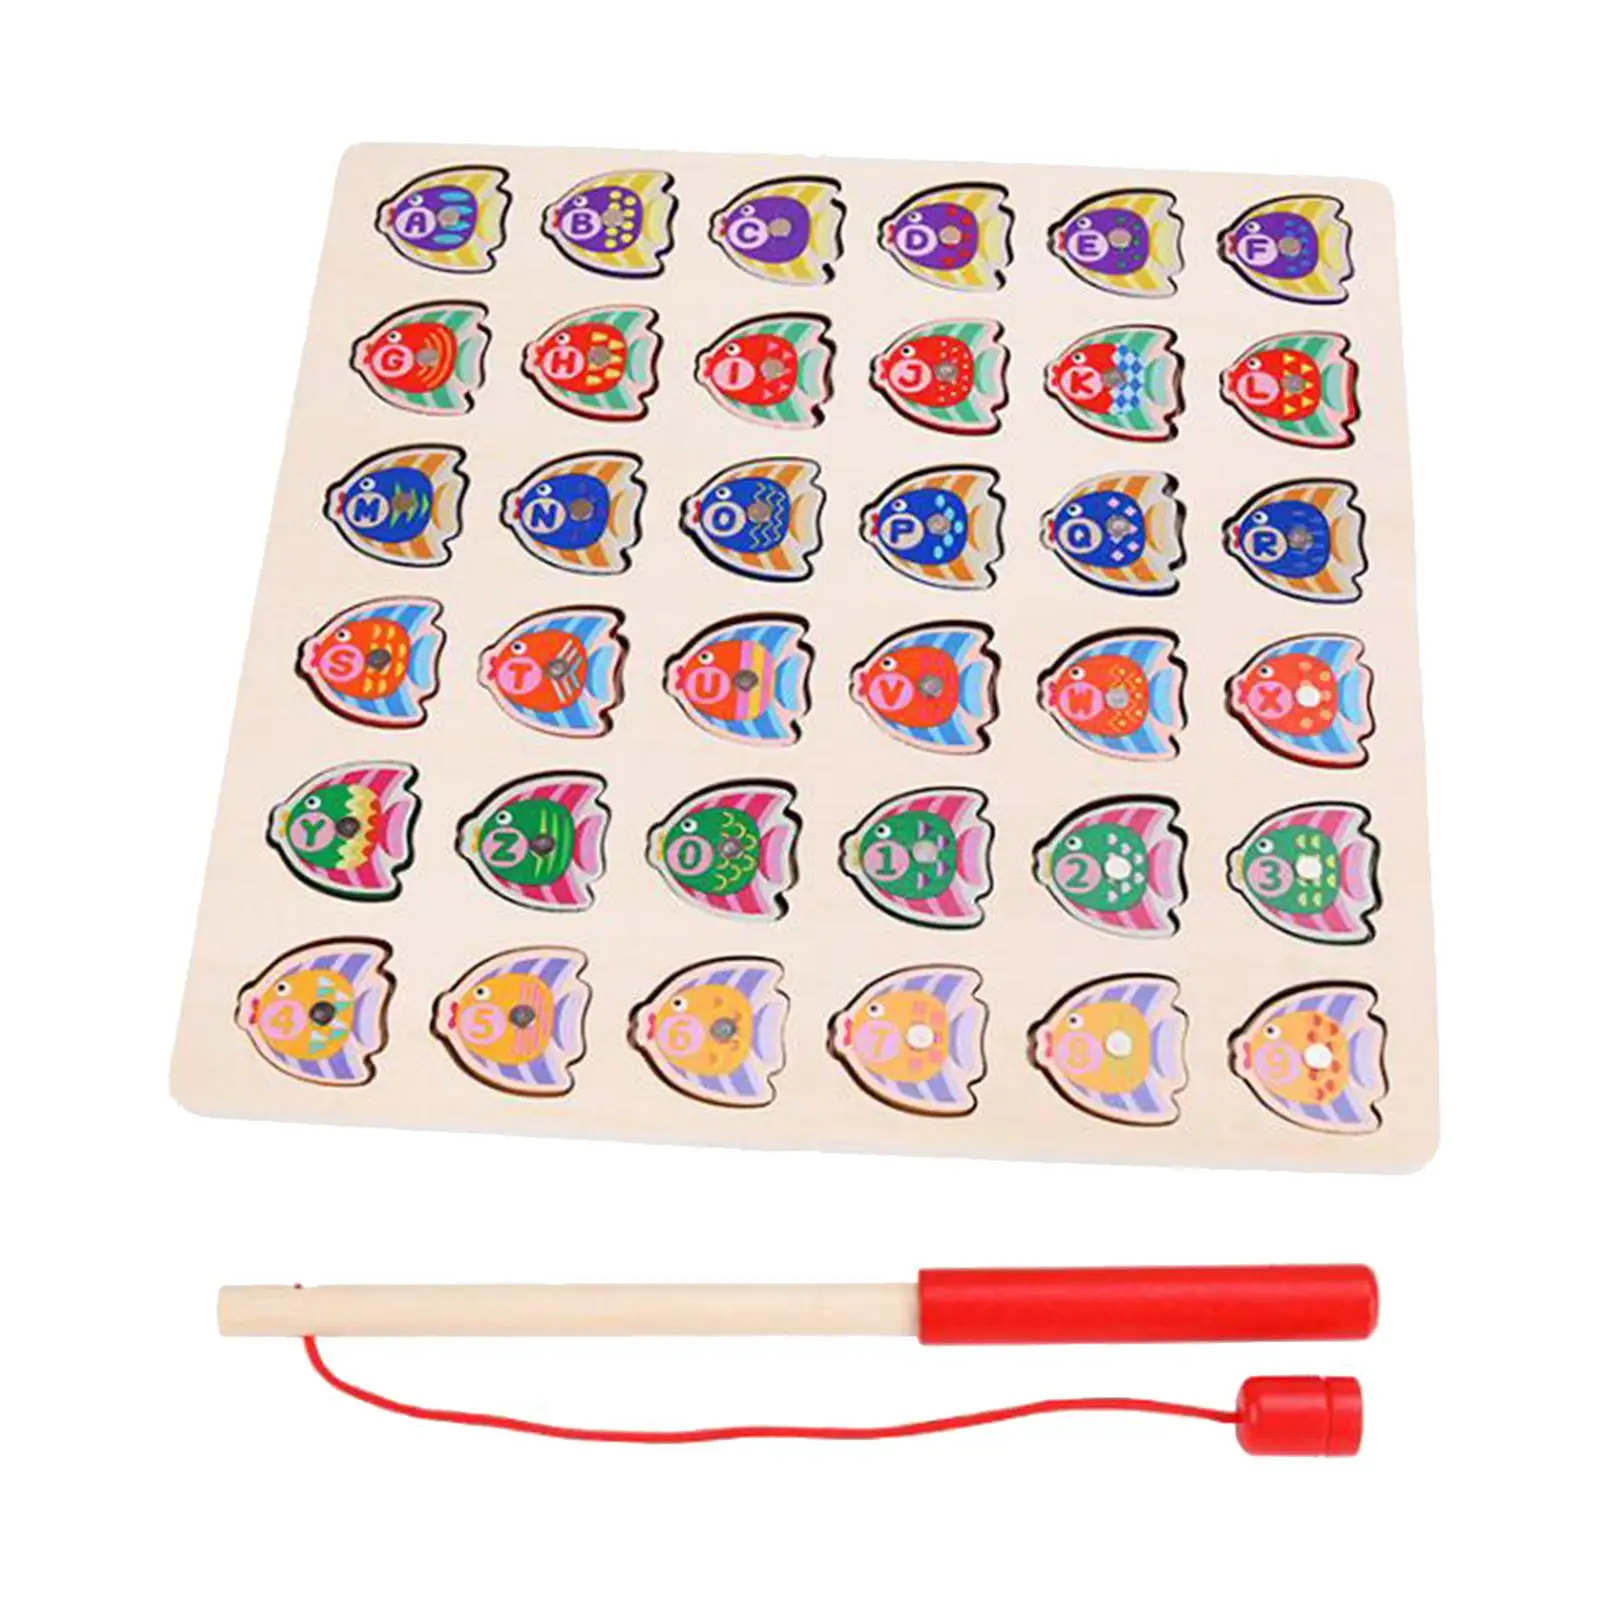 Magnetic Fishing Game Play Set Pretend Play Developmental Toys for Toddler